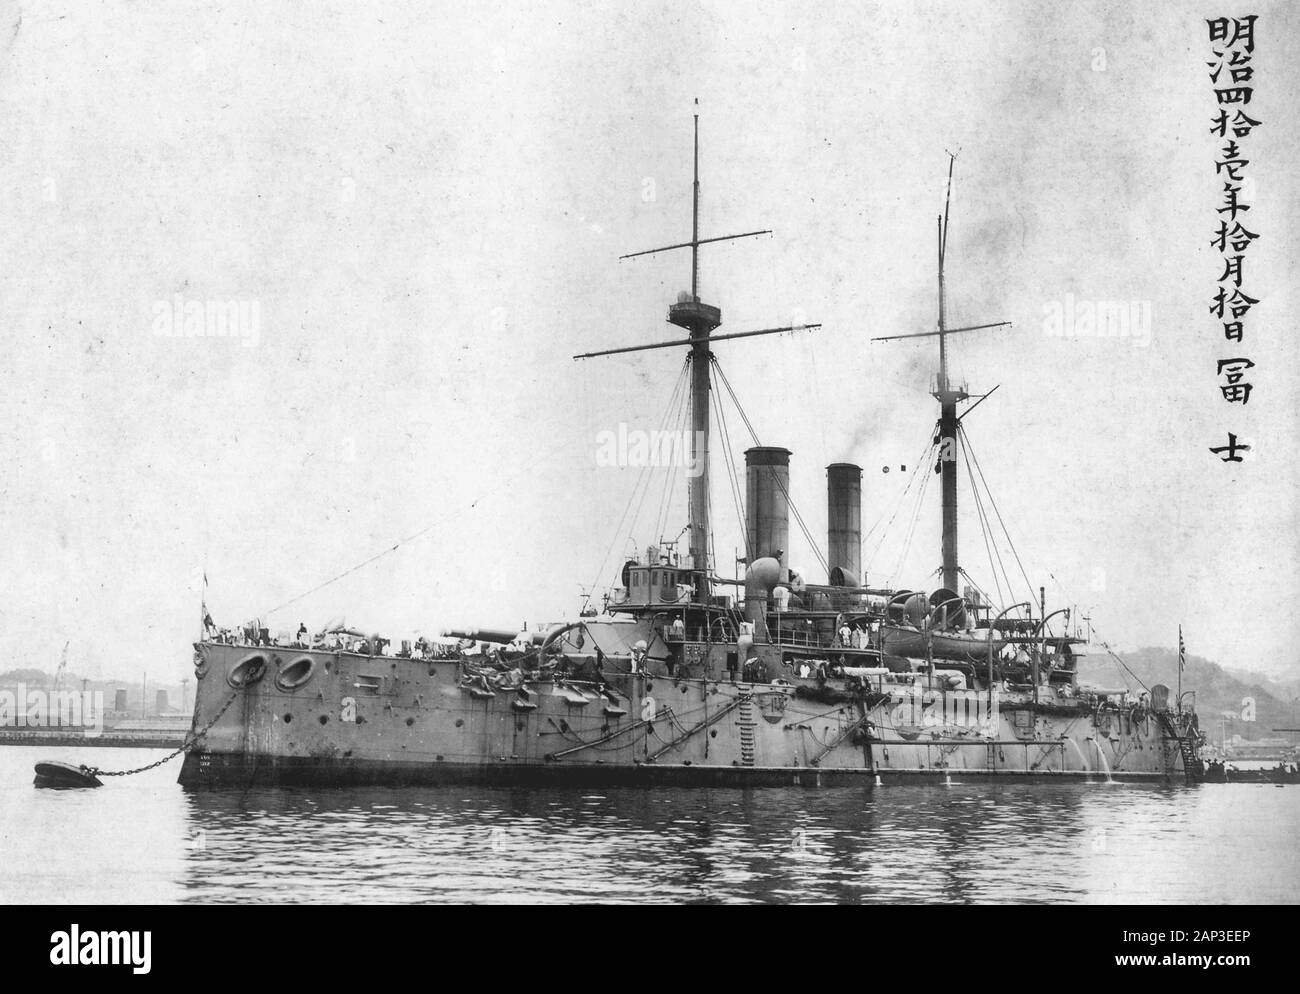 The Fuji, a member of the Fuji-class battleships of the Japanese Imperial Navy, circa 1908 Stock Photo